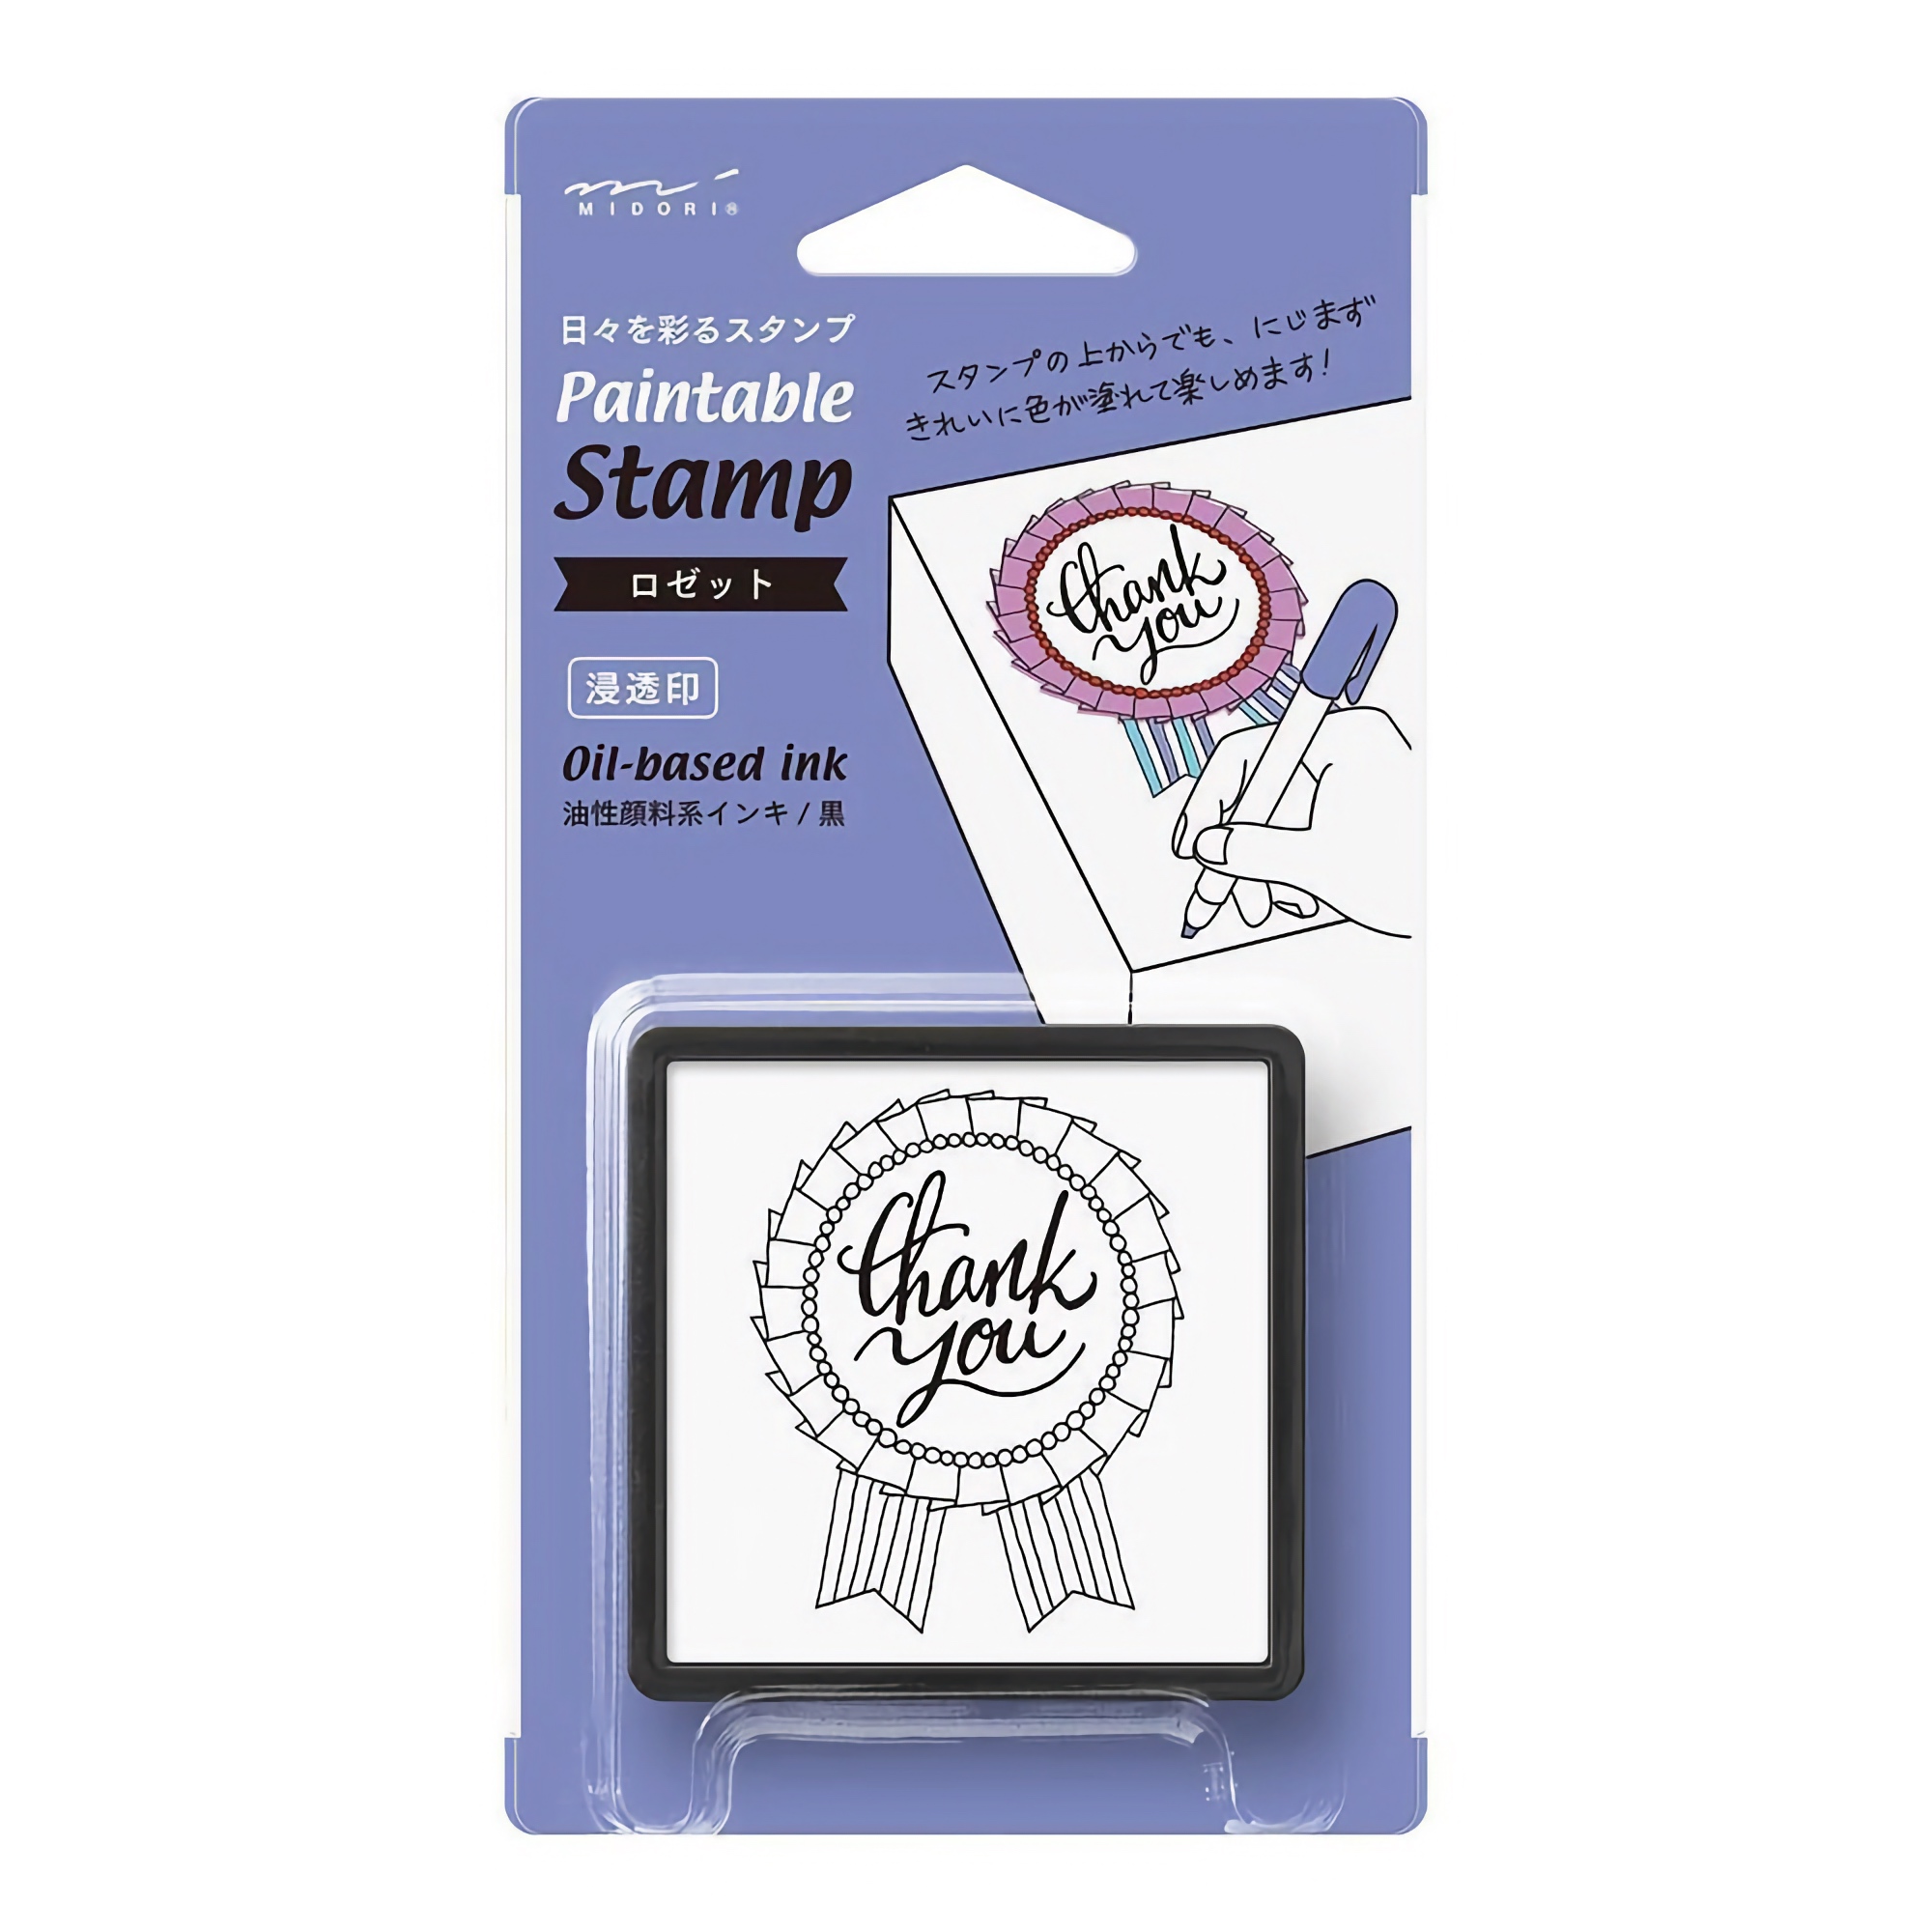 Midori Paintable Stamp Pre-inked Thank You